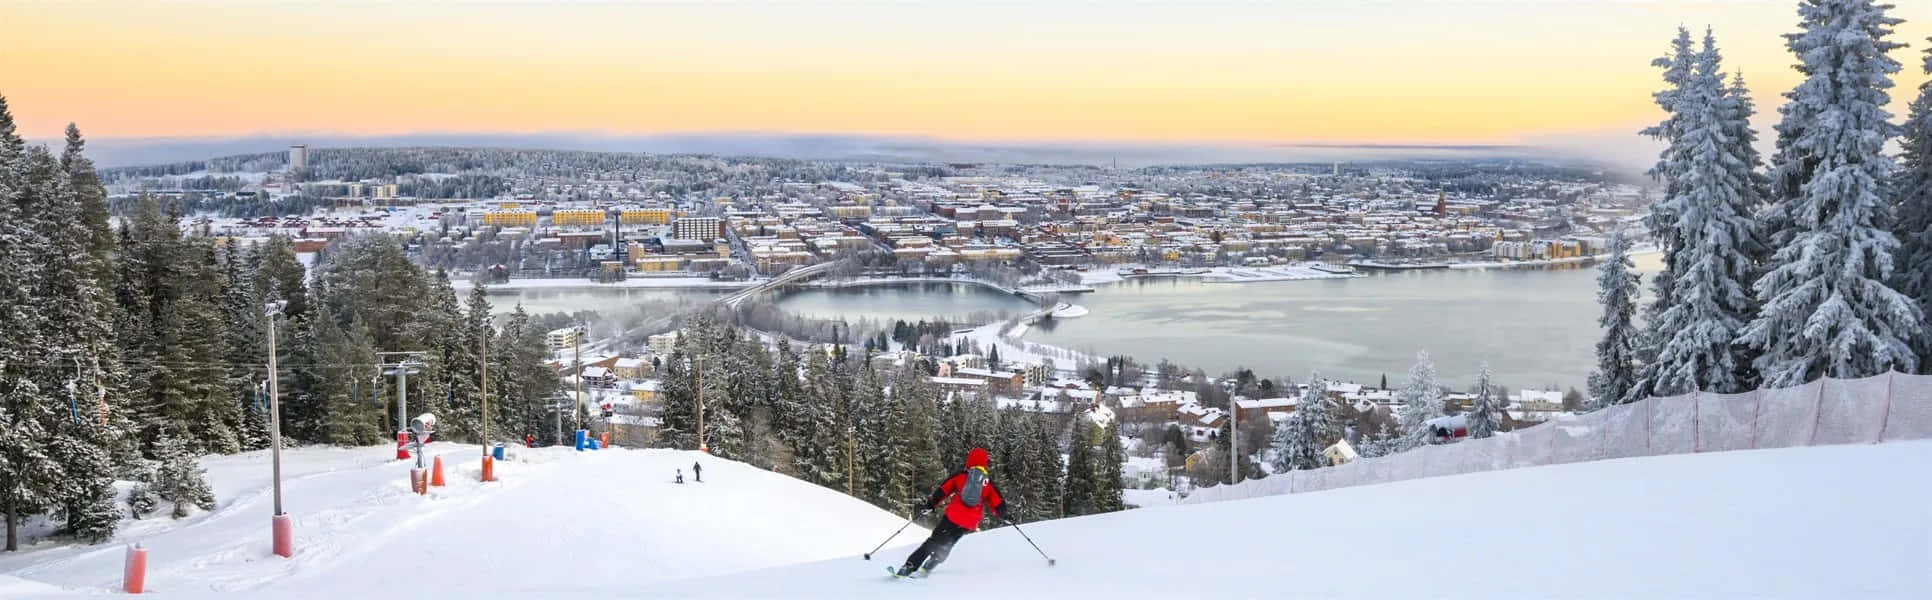 Ostersund Skiing Overlooking Cityscape Wallpaper